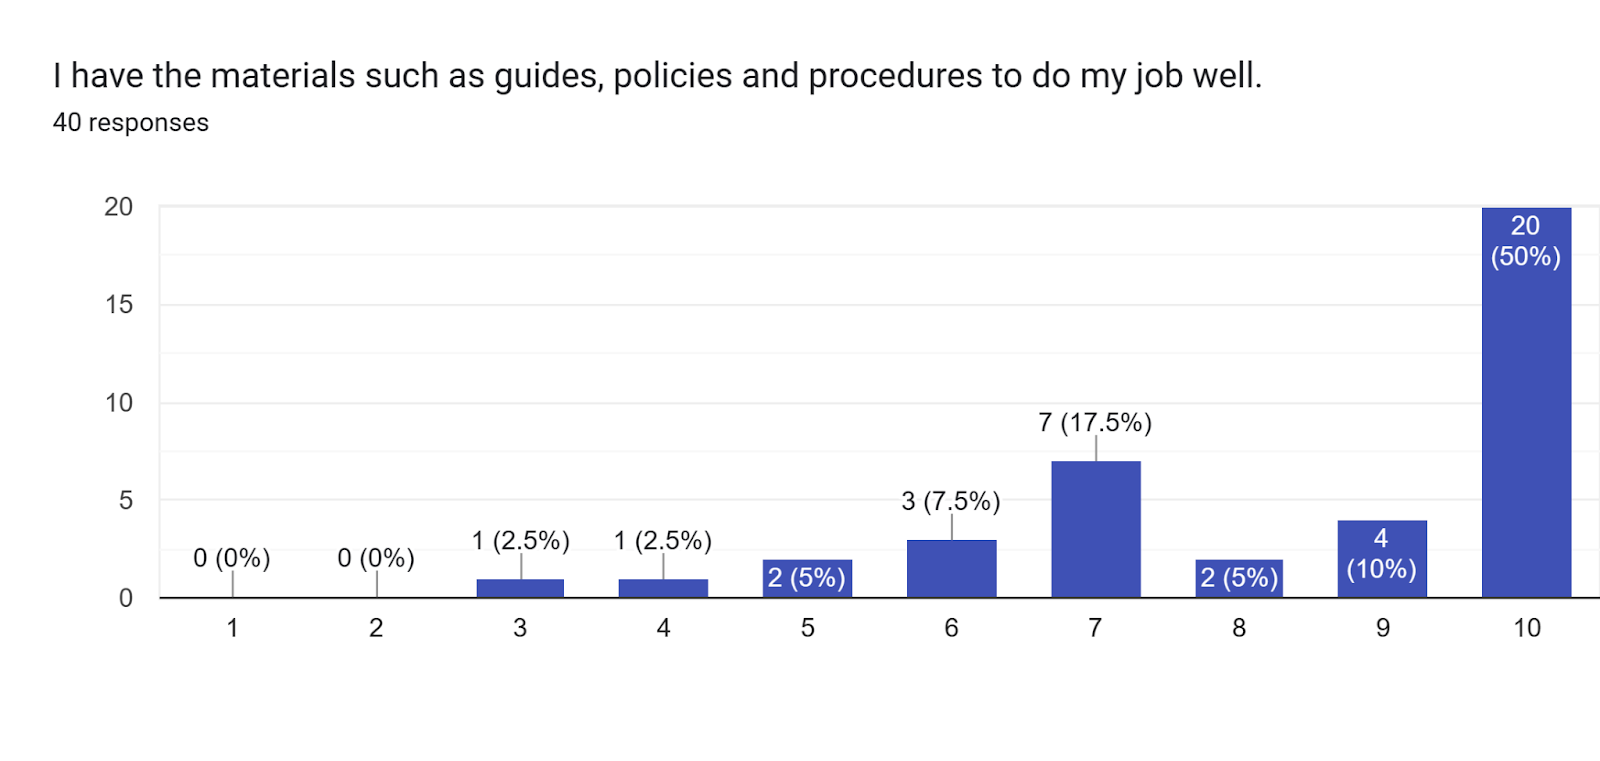 Forms response chart. Question title: I have the materials such as guides, policies and procedures to do my job well.. Number of responses: 40 responses.